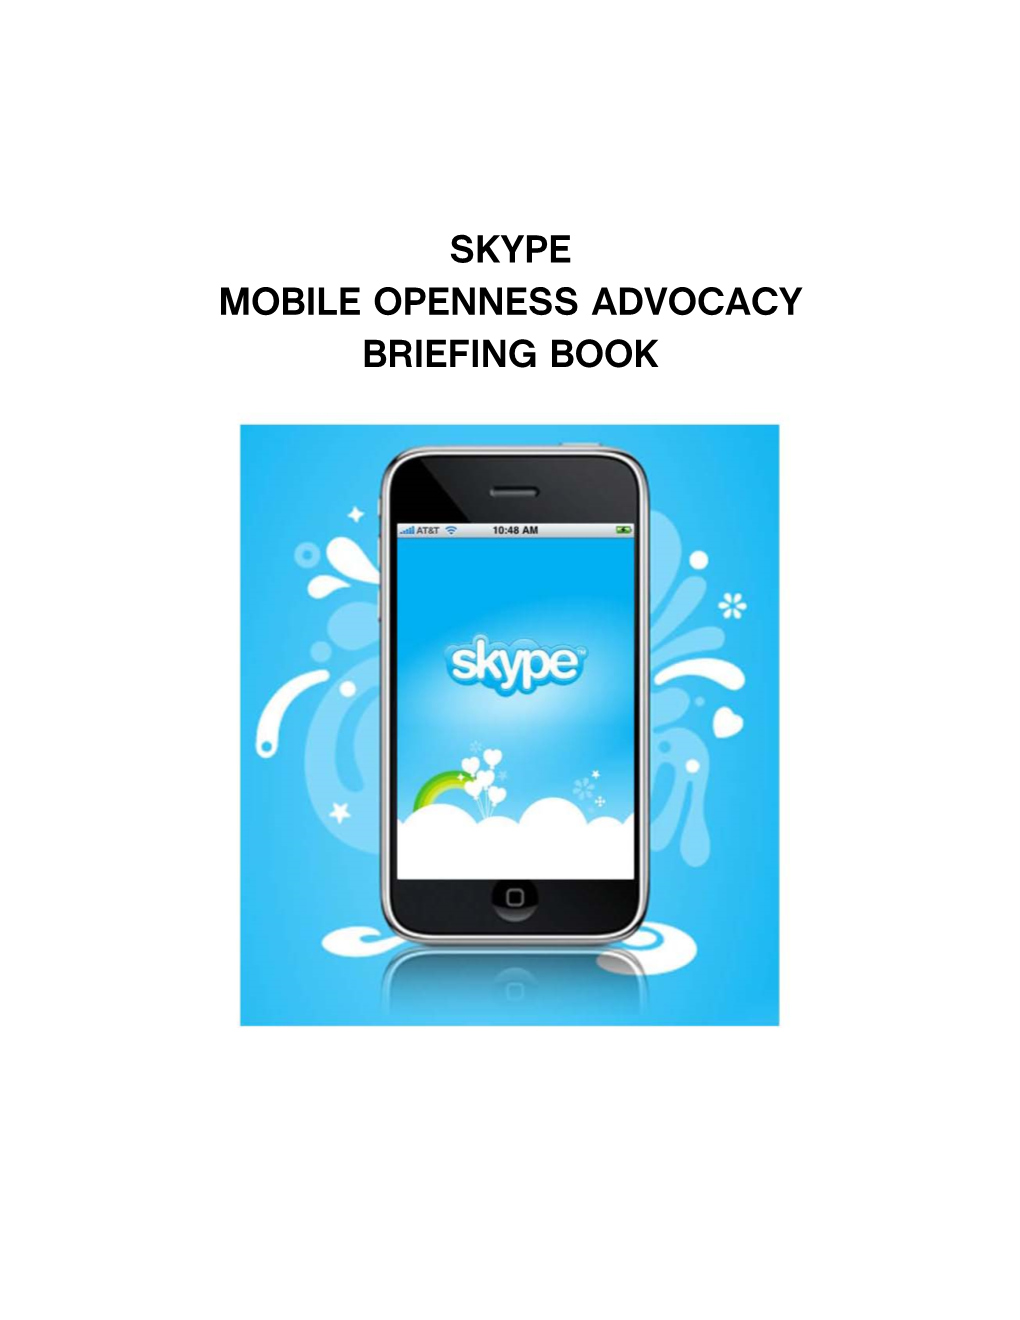 Skype Mobile Openness Advocacy Briefing Book